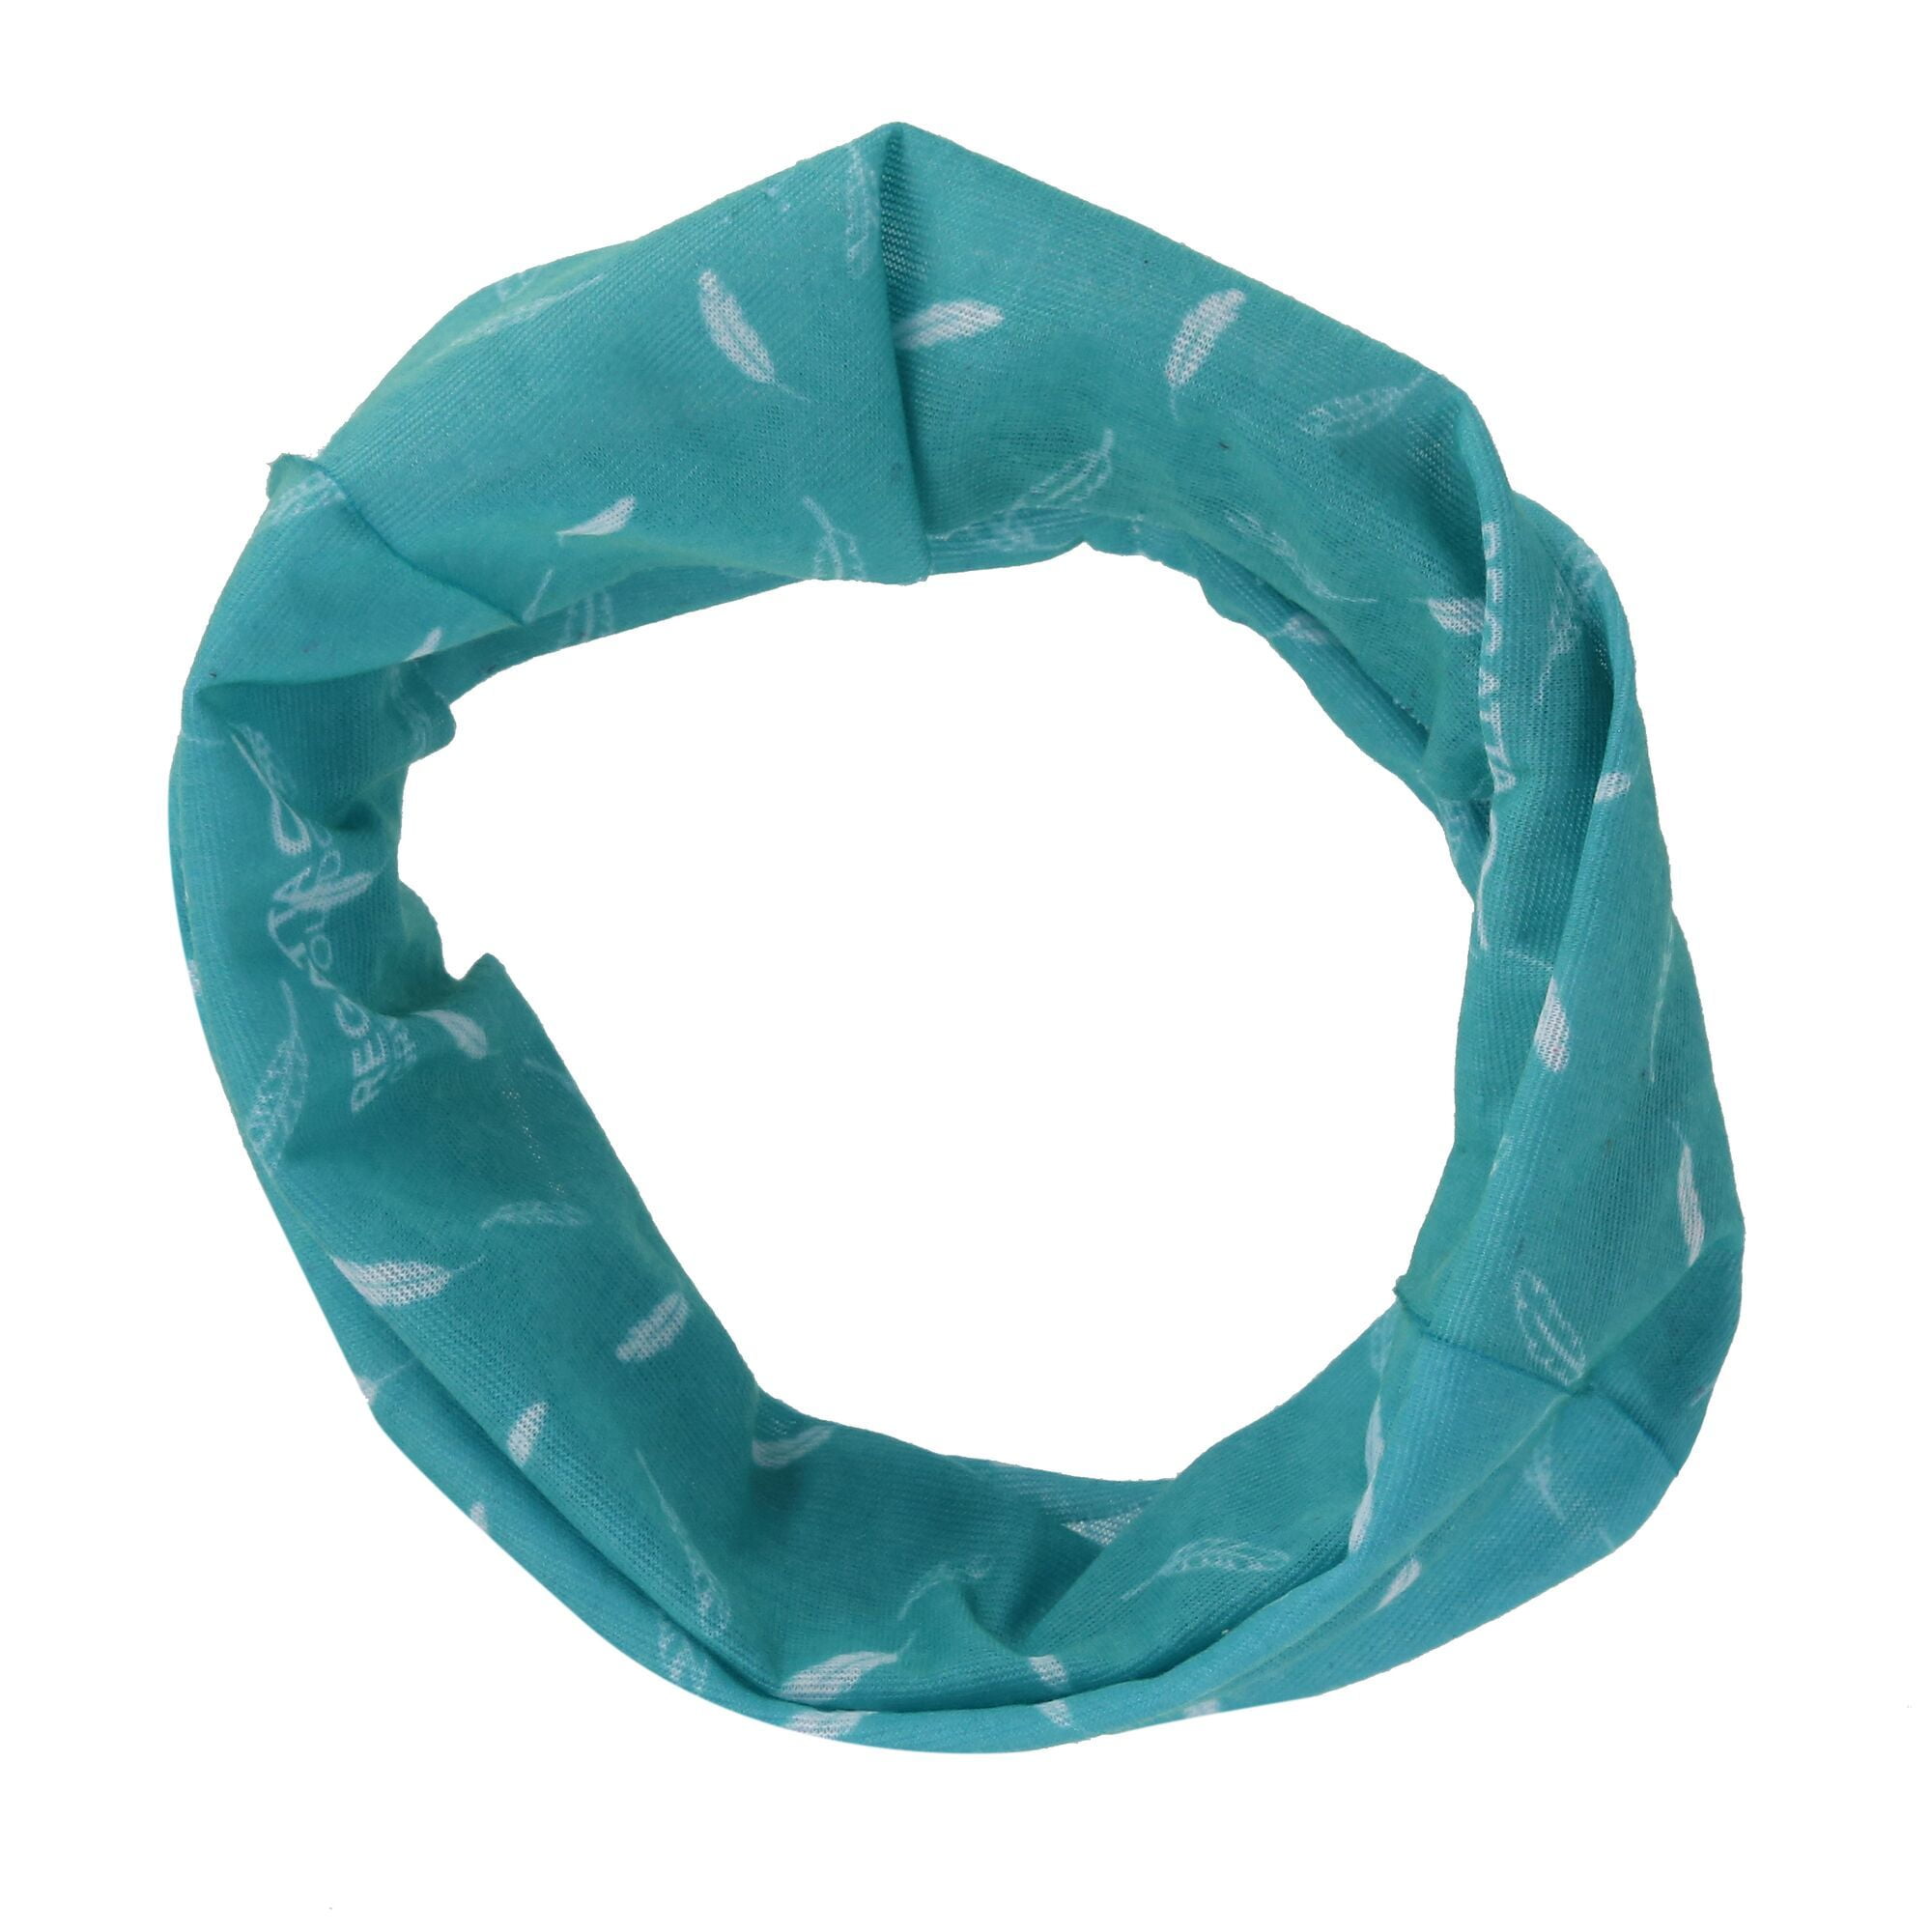 Details about   SOLID COLORS SEAMLESS TUBE NECK WARMER FACE MASK HEADBAND STRETCHY POLYESTER 